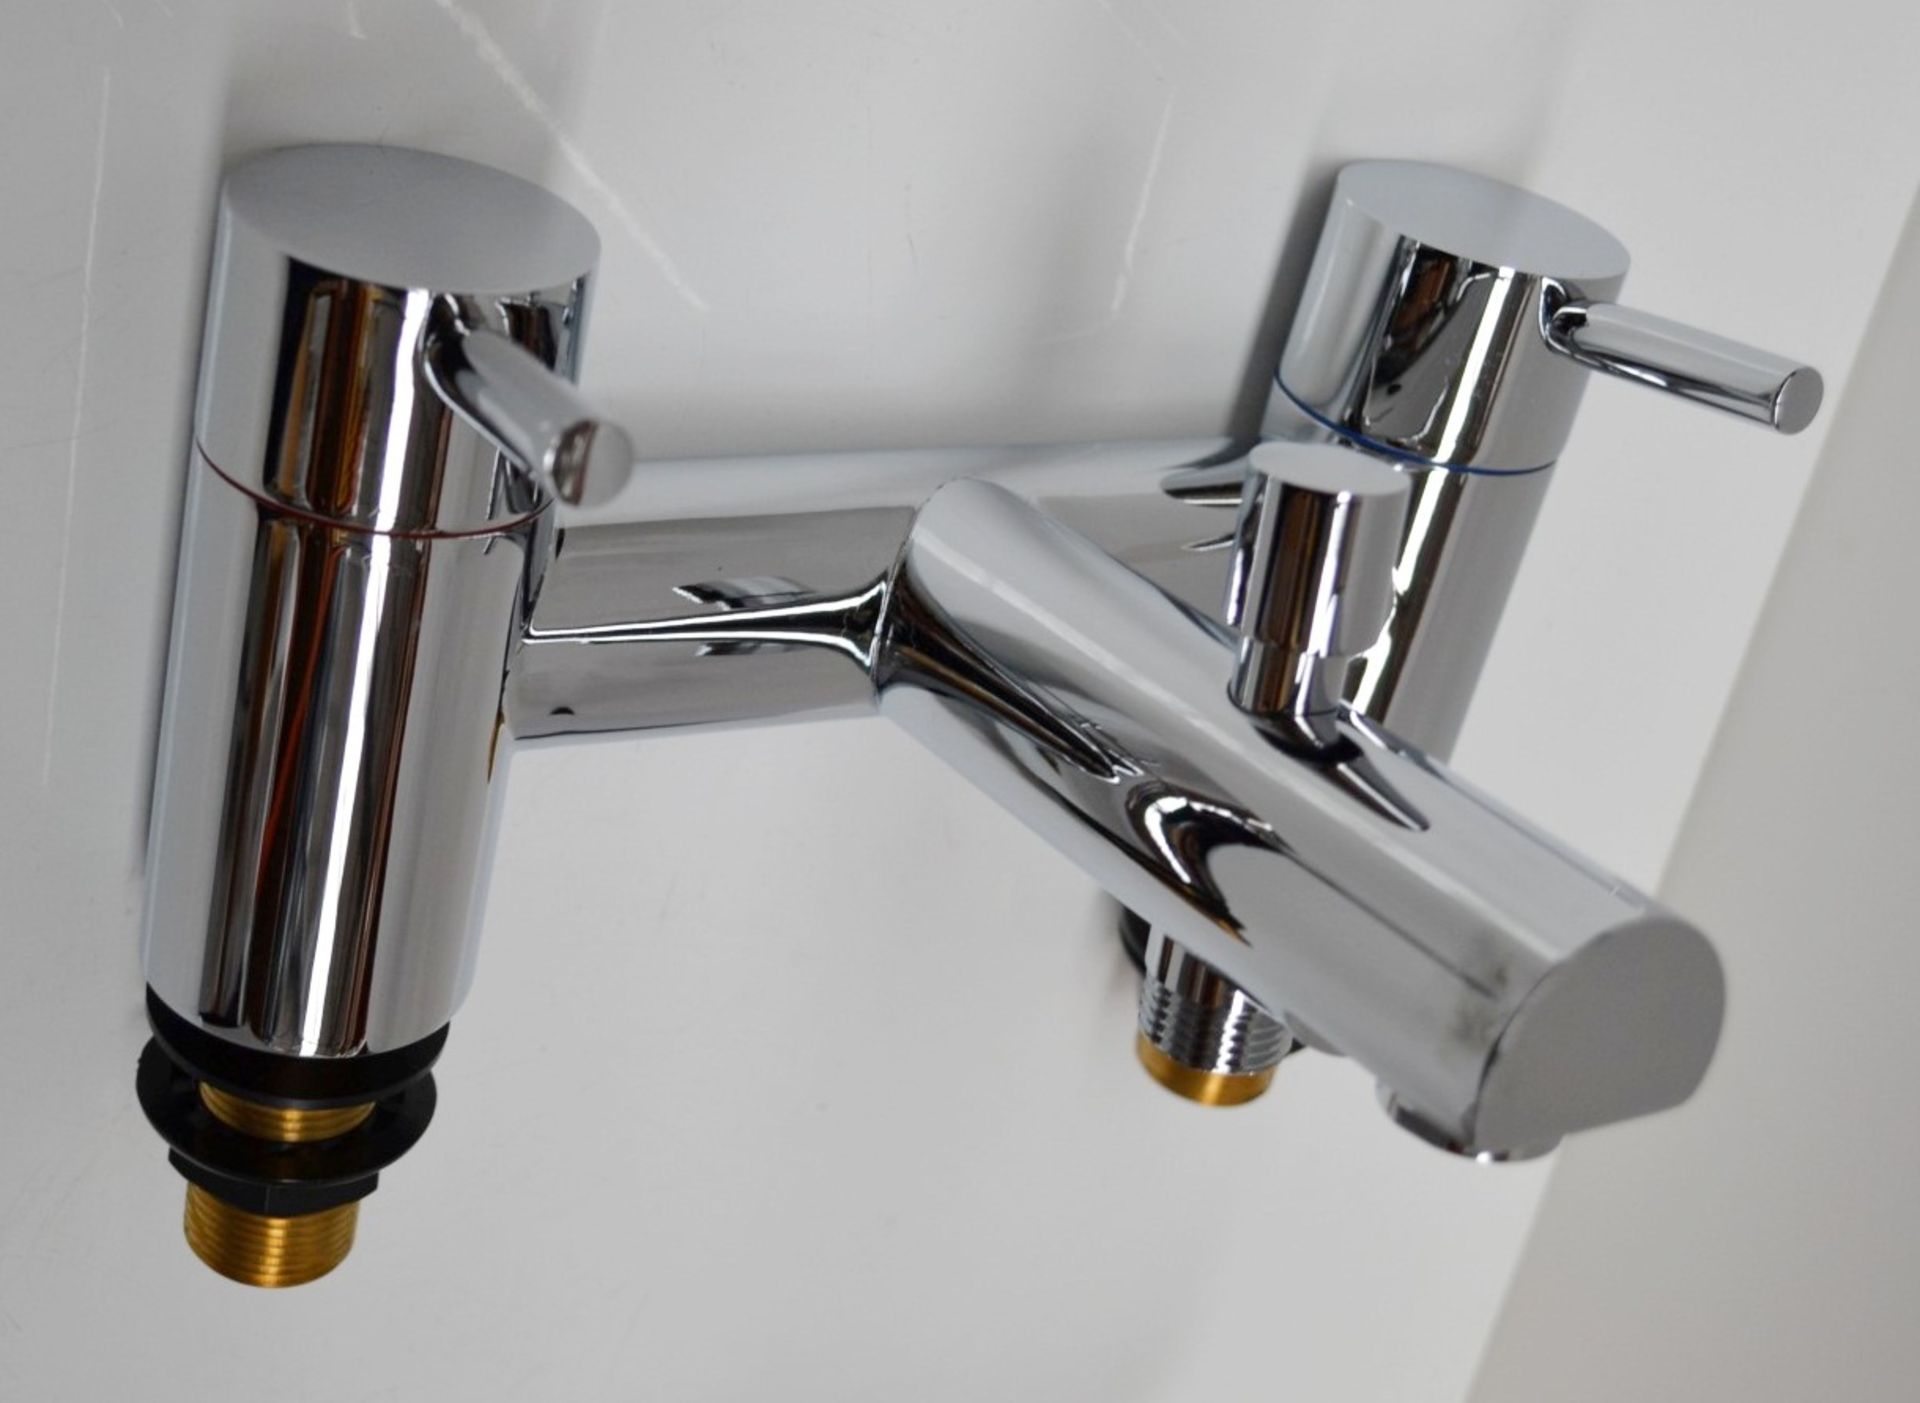 1 x Matrix Bath Mixer Tap - Featuring Modern Style With A Round Shape - Ref: MBI031 - CL190 - Unused - Image 6 of 8